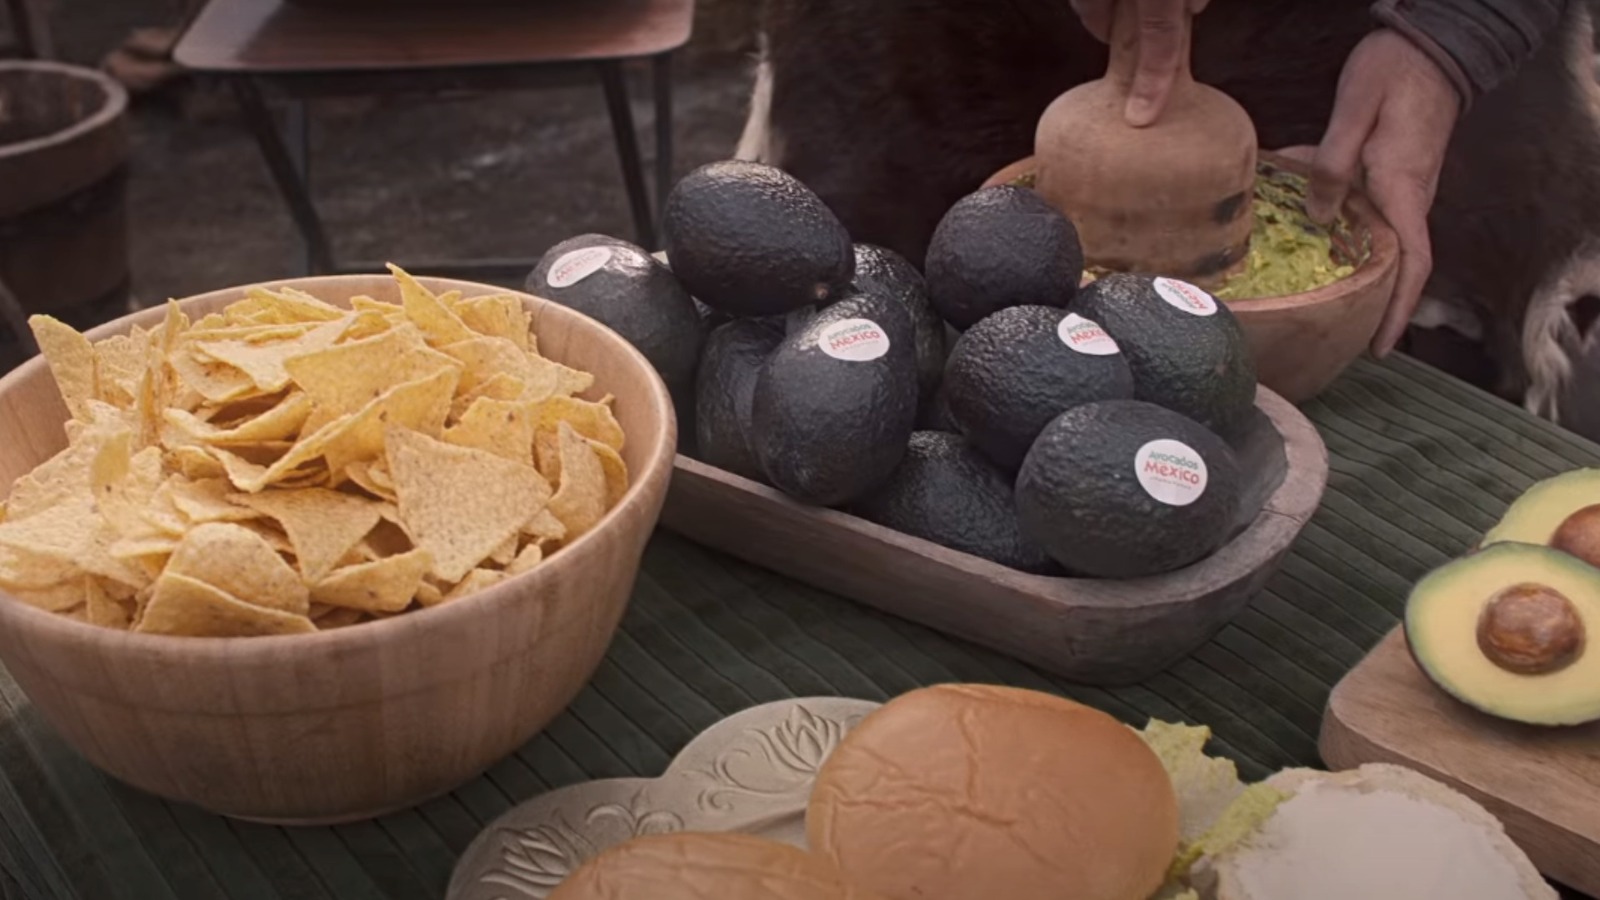 The Avocados From Mexico Super Bowl Commercial Had Twitter Baffled